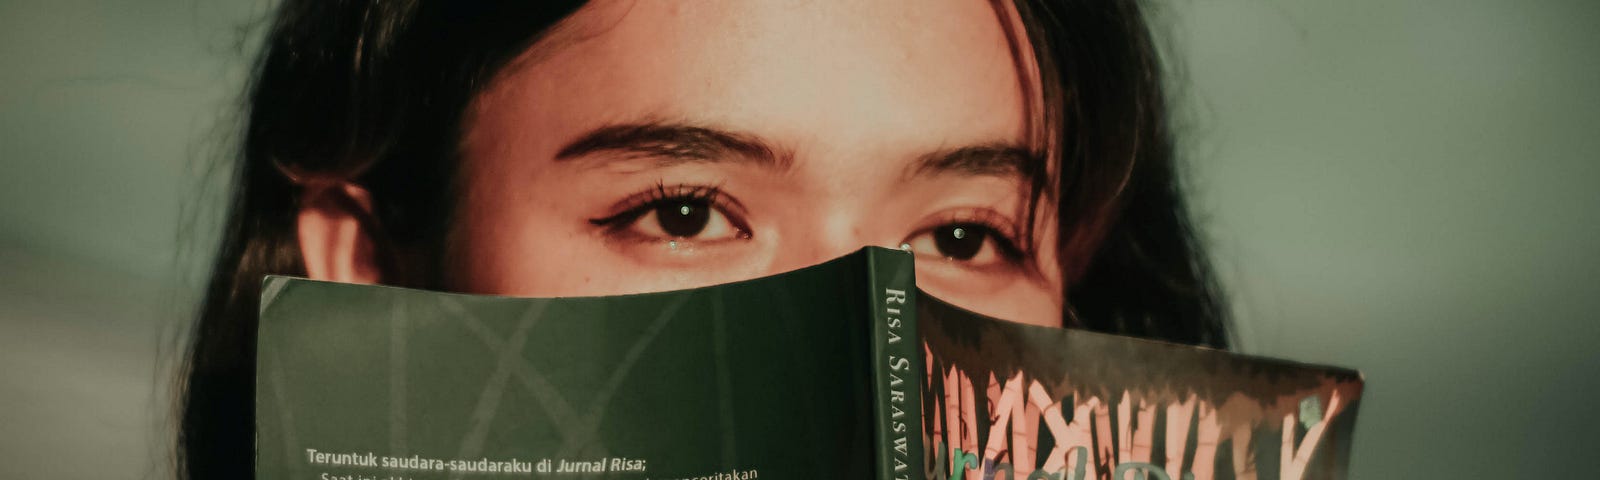 A woman looks off into the distance, covering up half her face with a book.